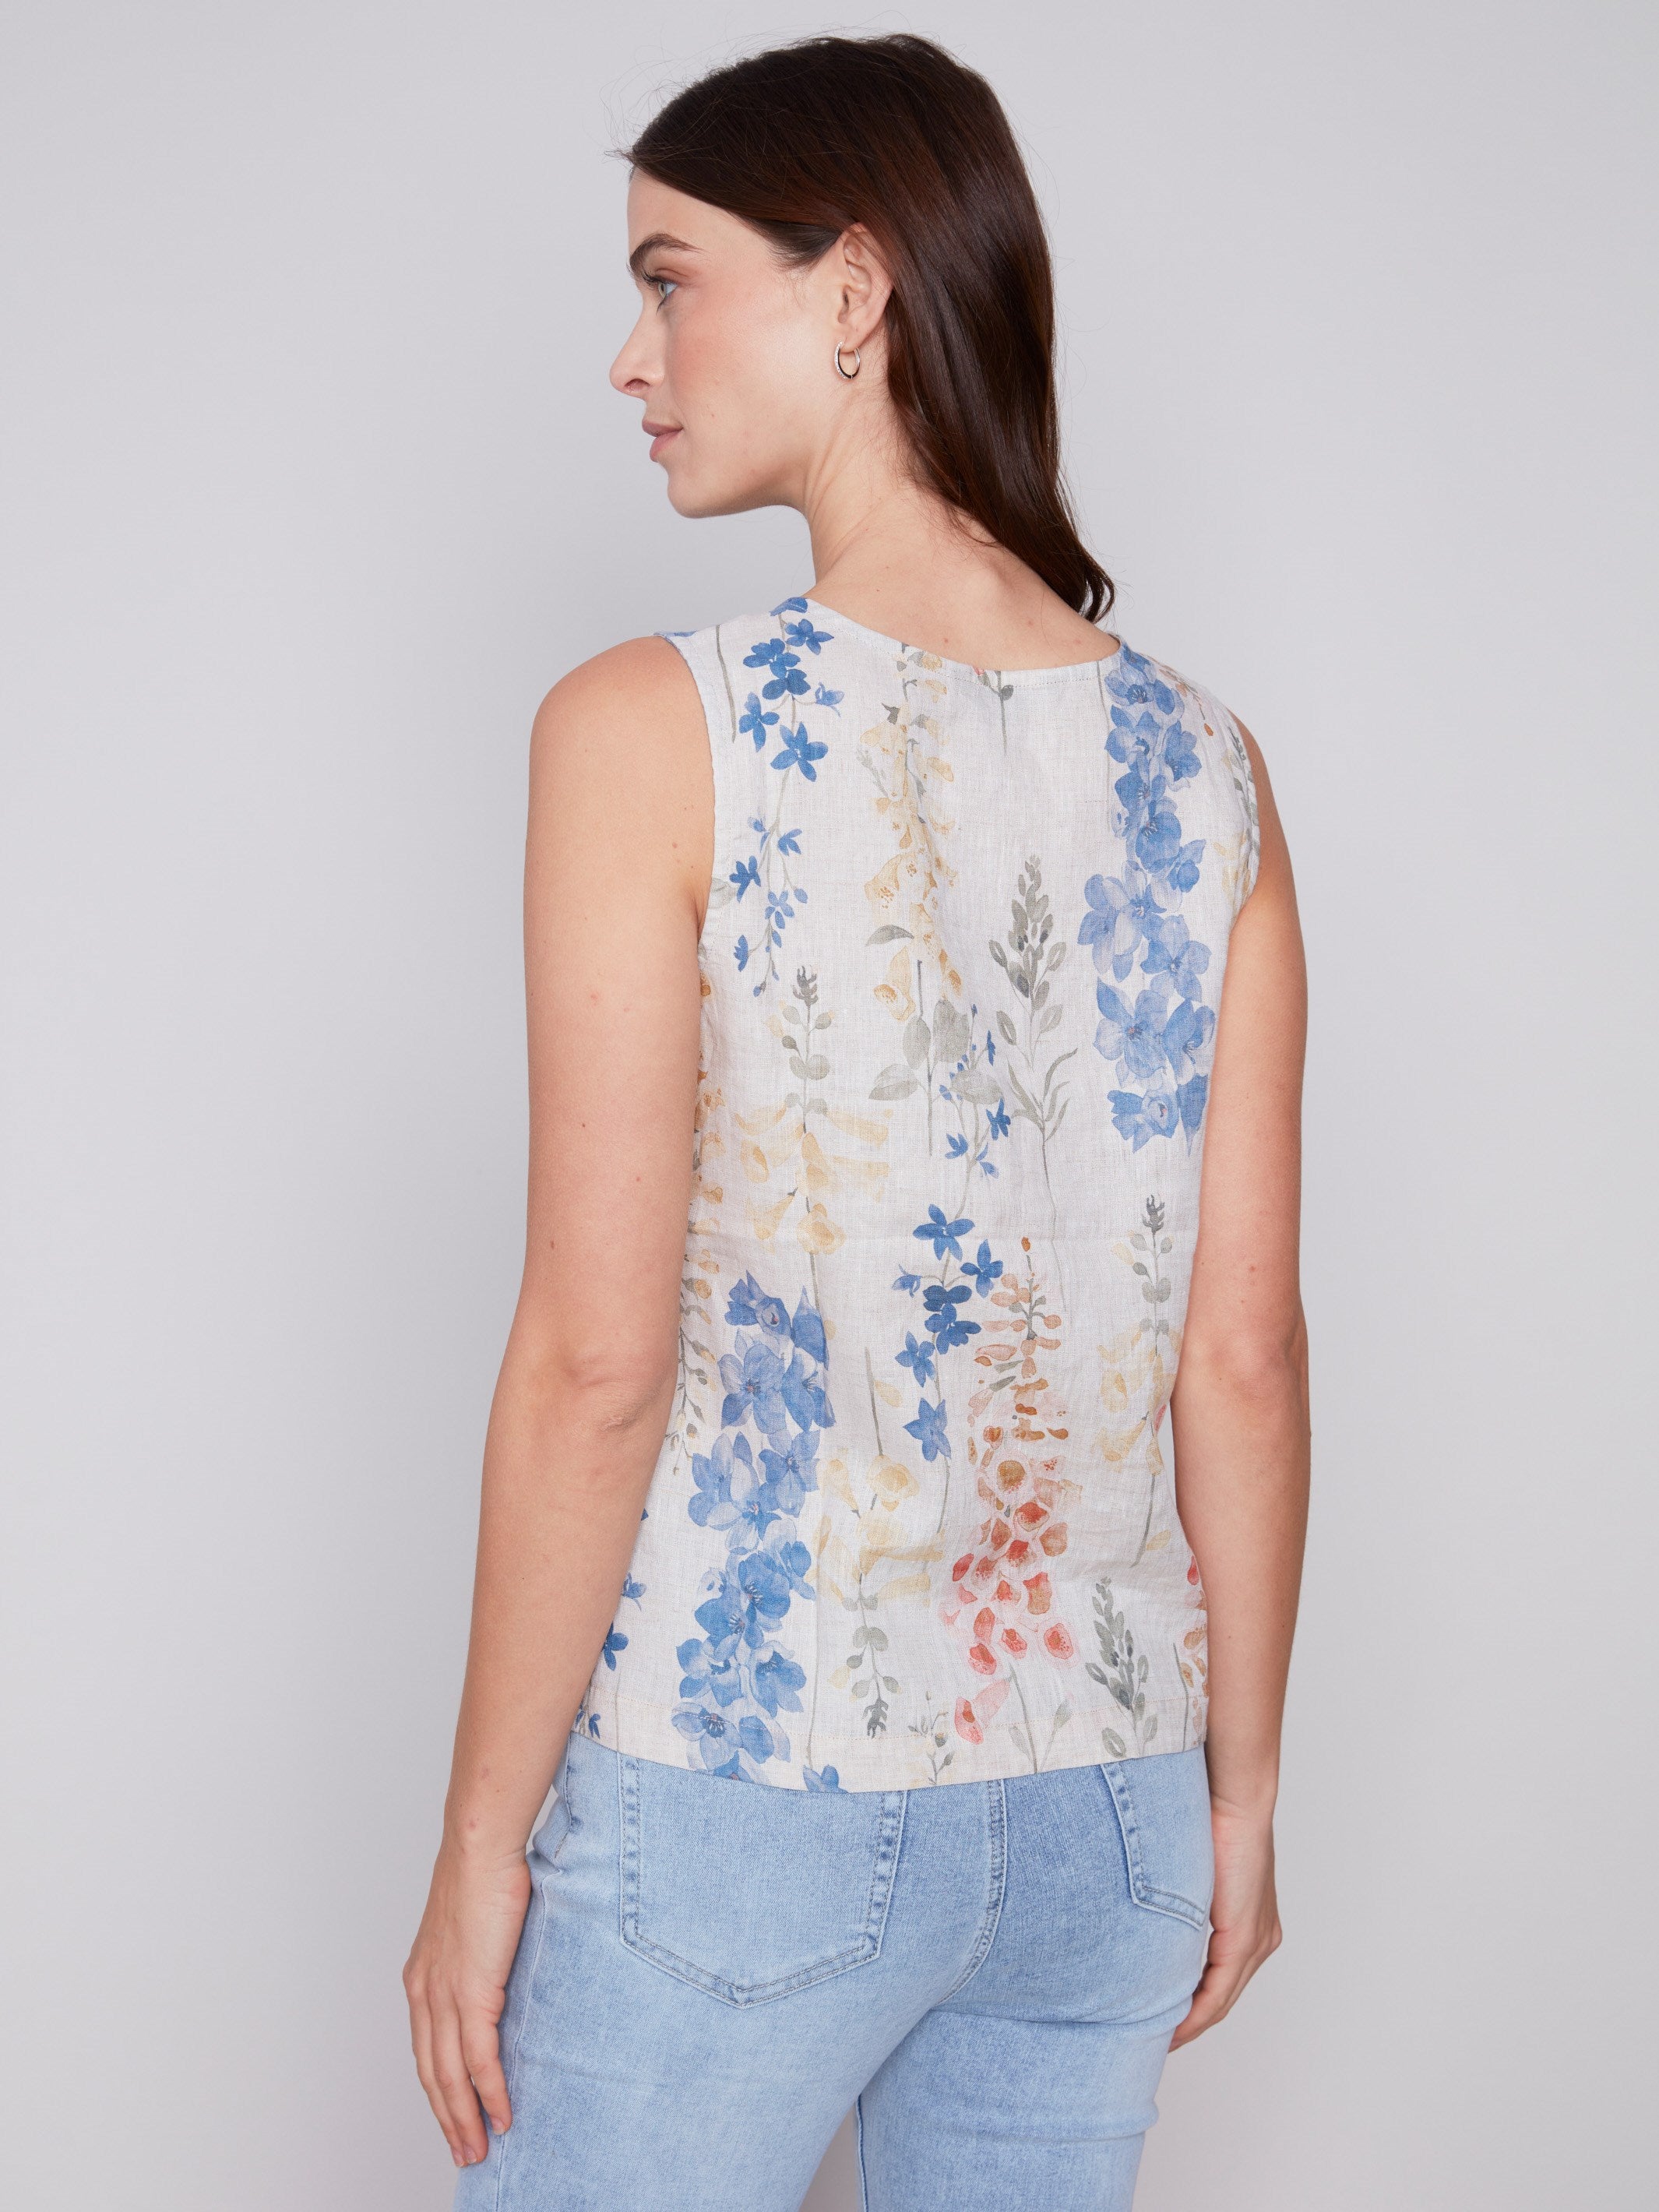 Charlie B Printed Sleeveless Linen Top with Button Detail - Garden - Image 5